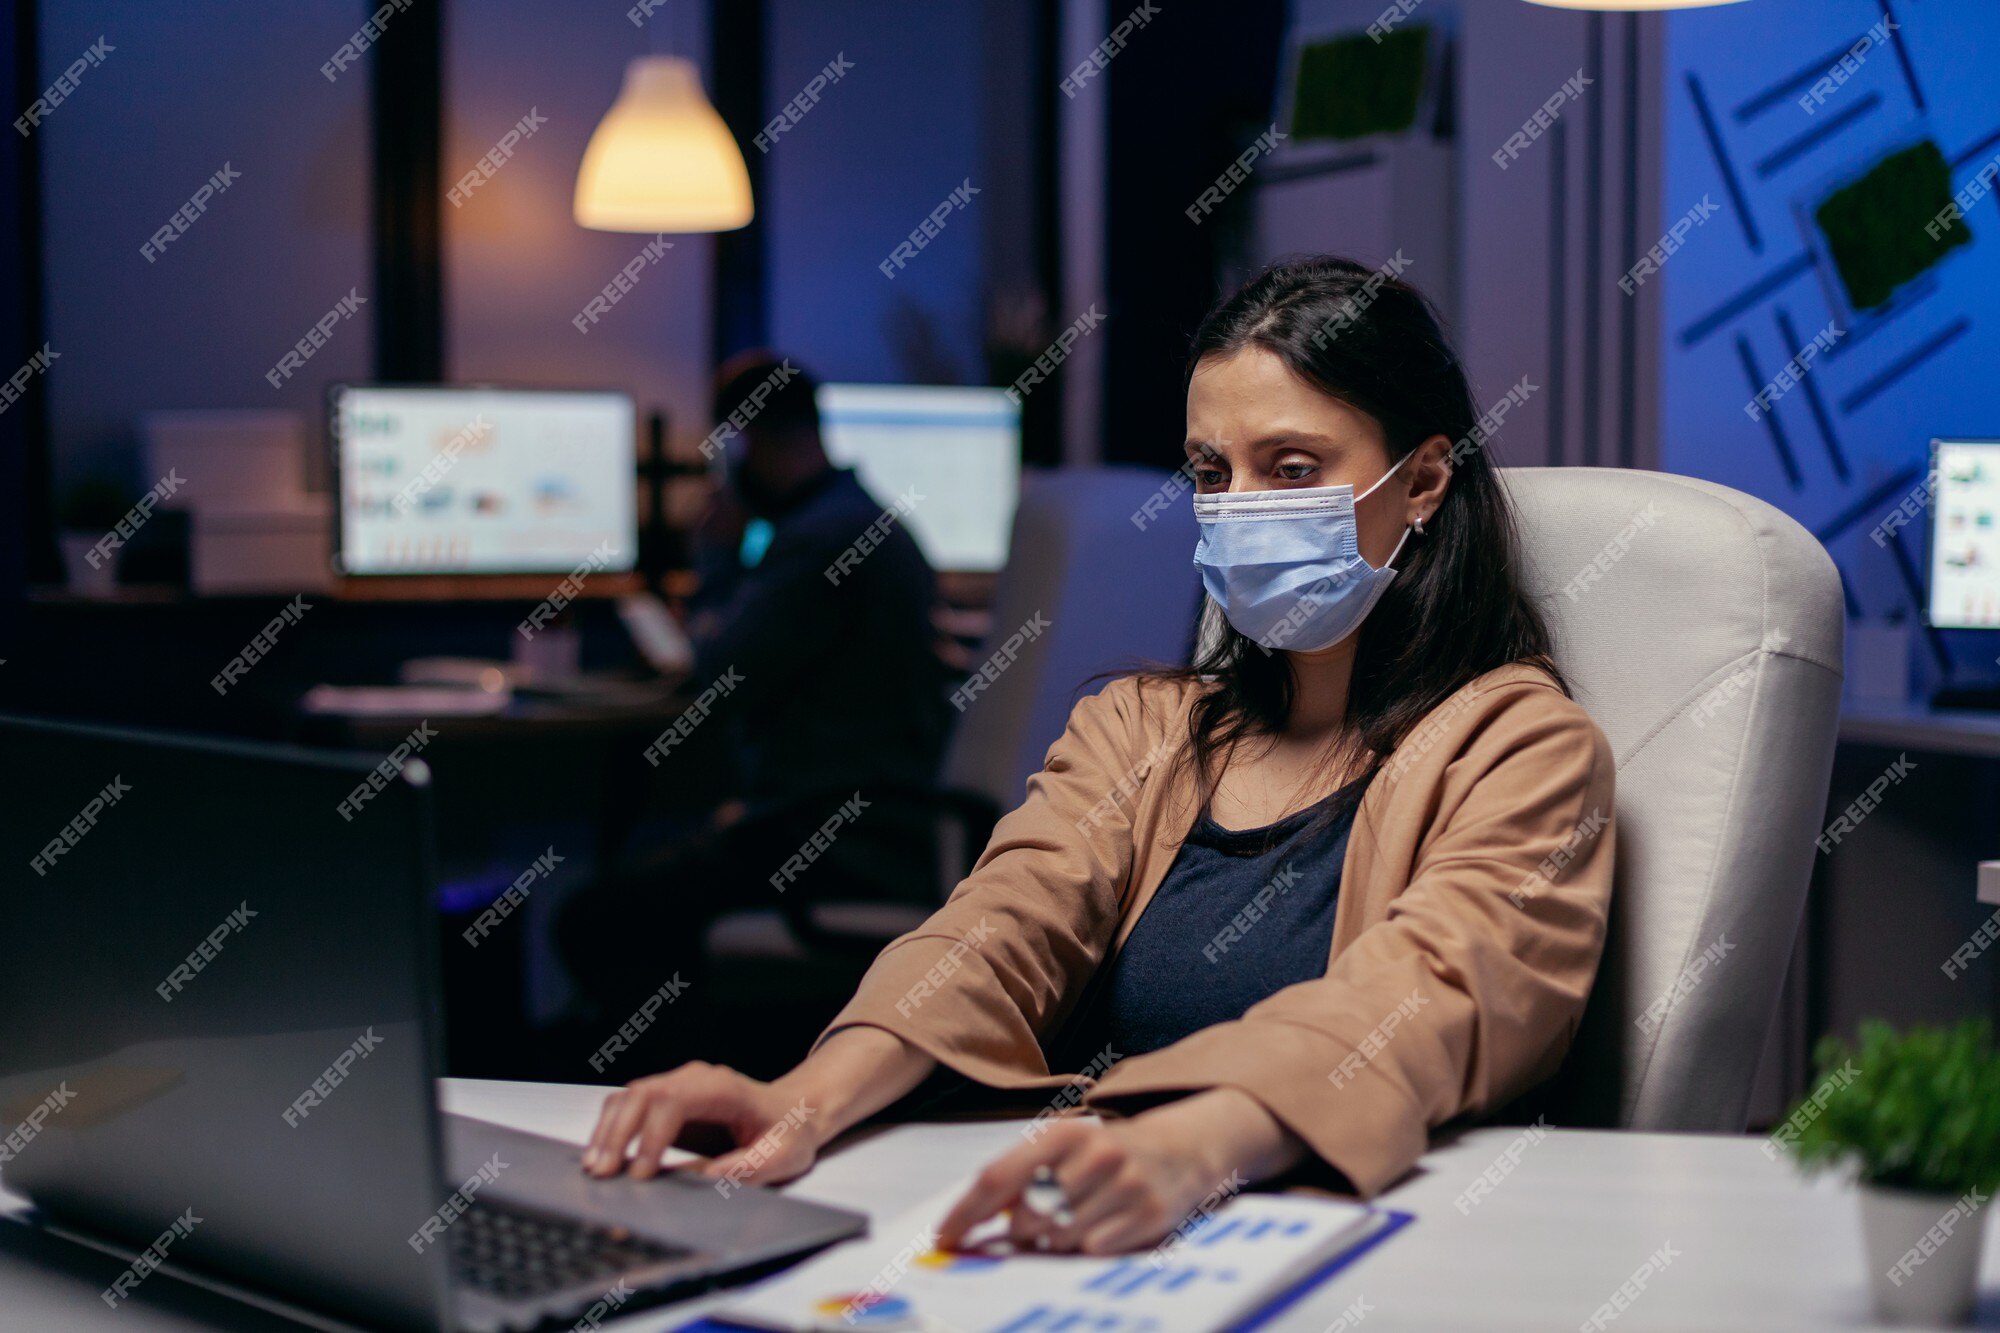 Premium Photo | Employee with protection face mask working late at night in  new normal office. woman following social distancing rules due to  coroanvirus pandemic while working late hours at the office.